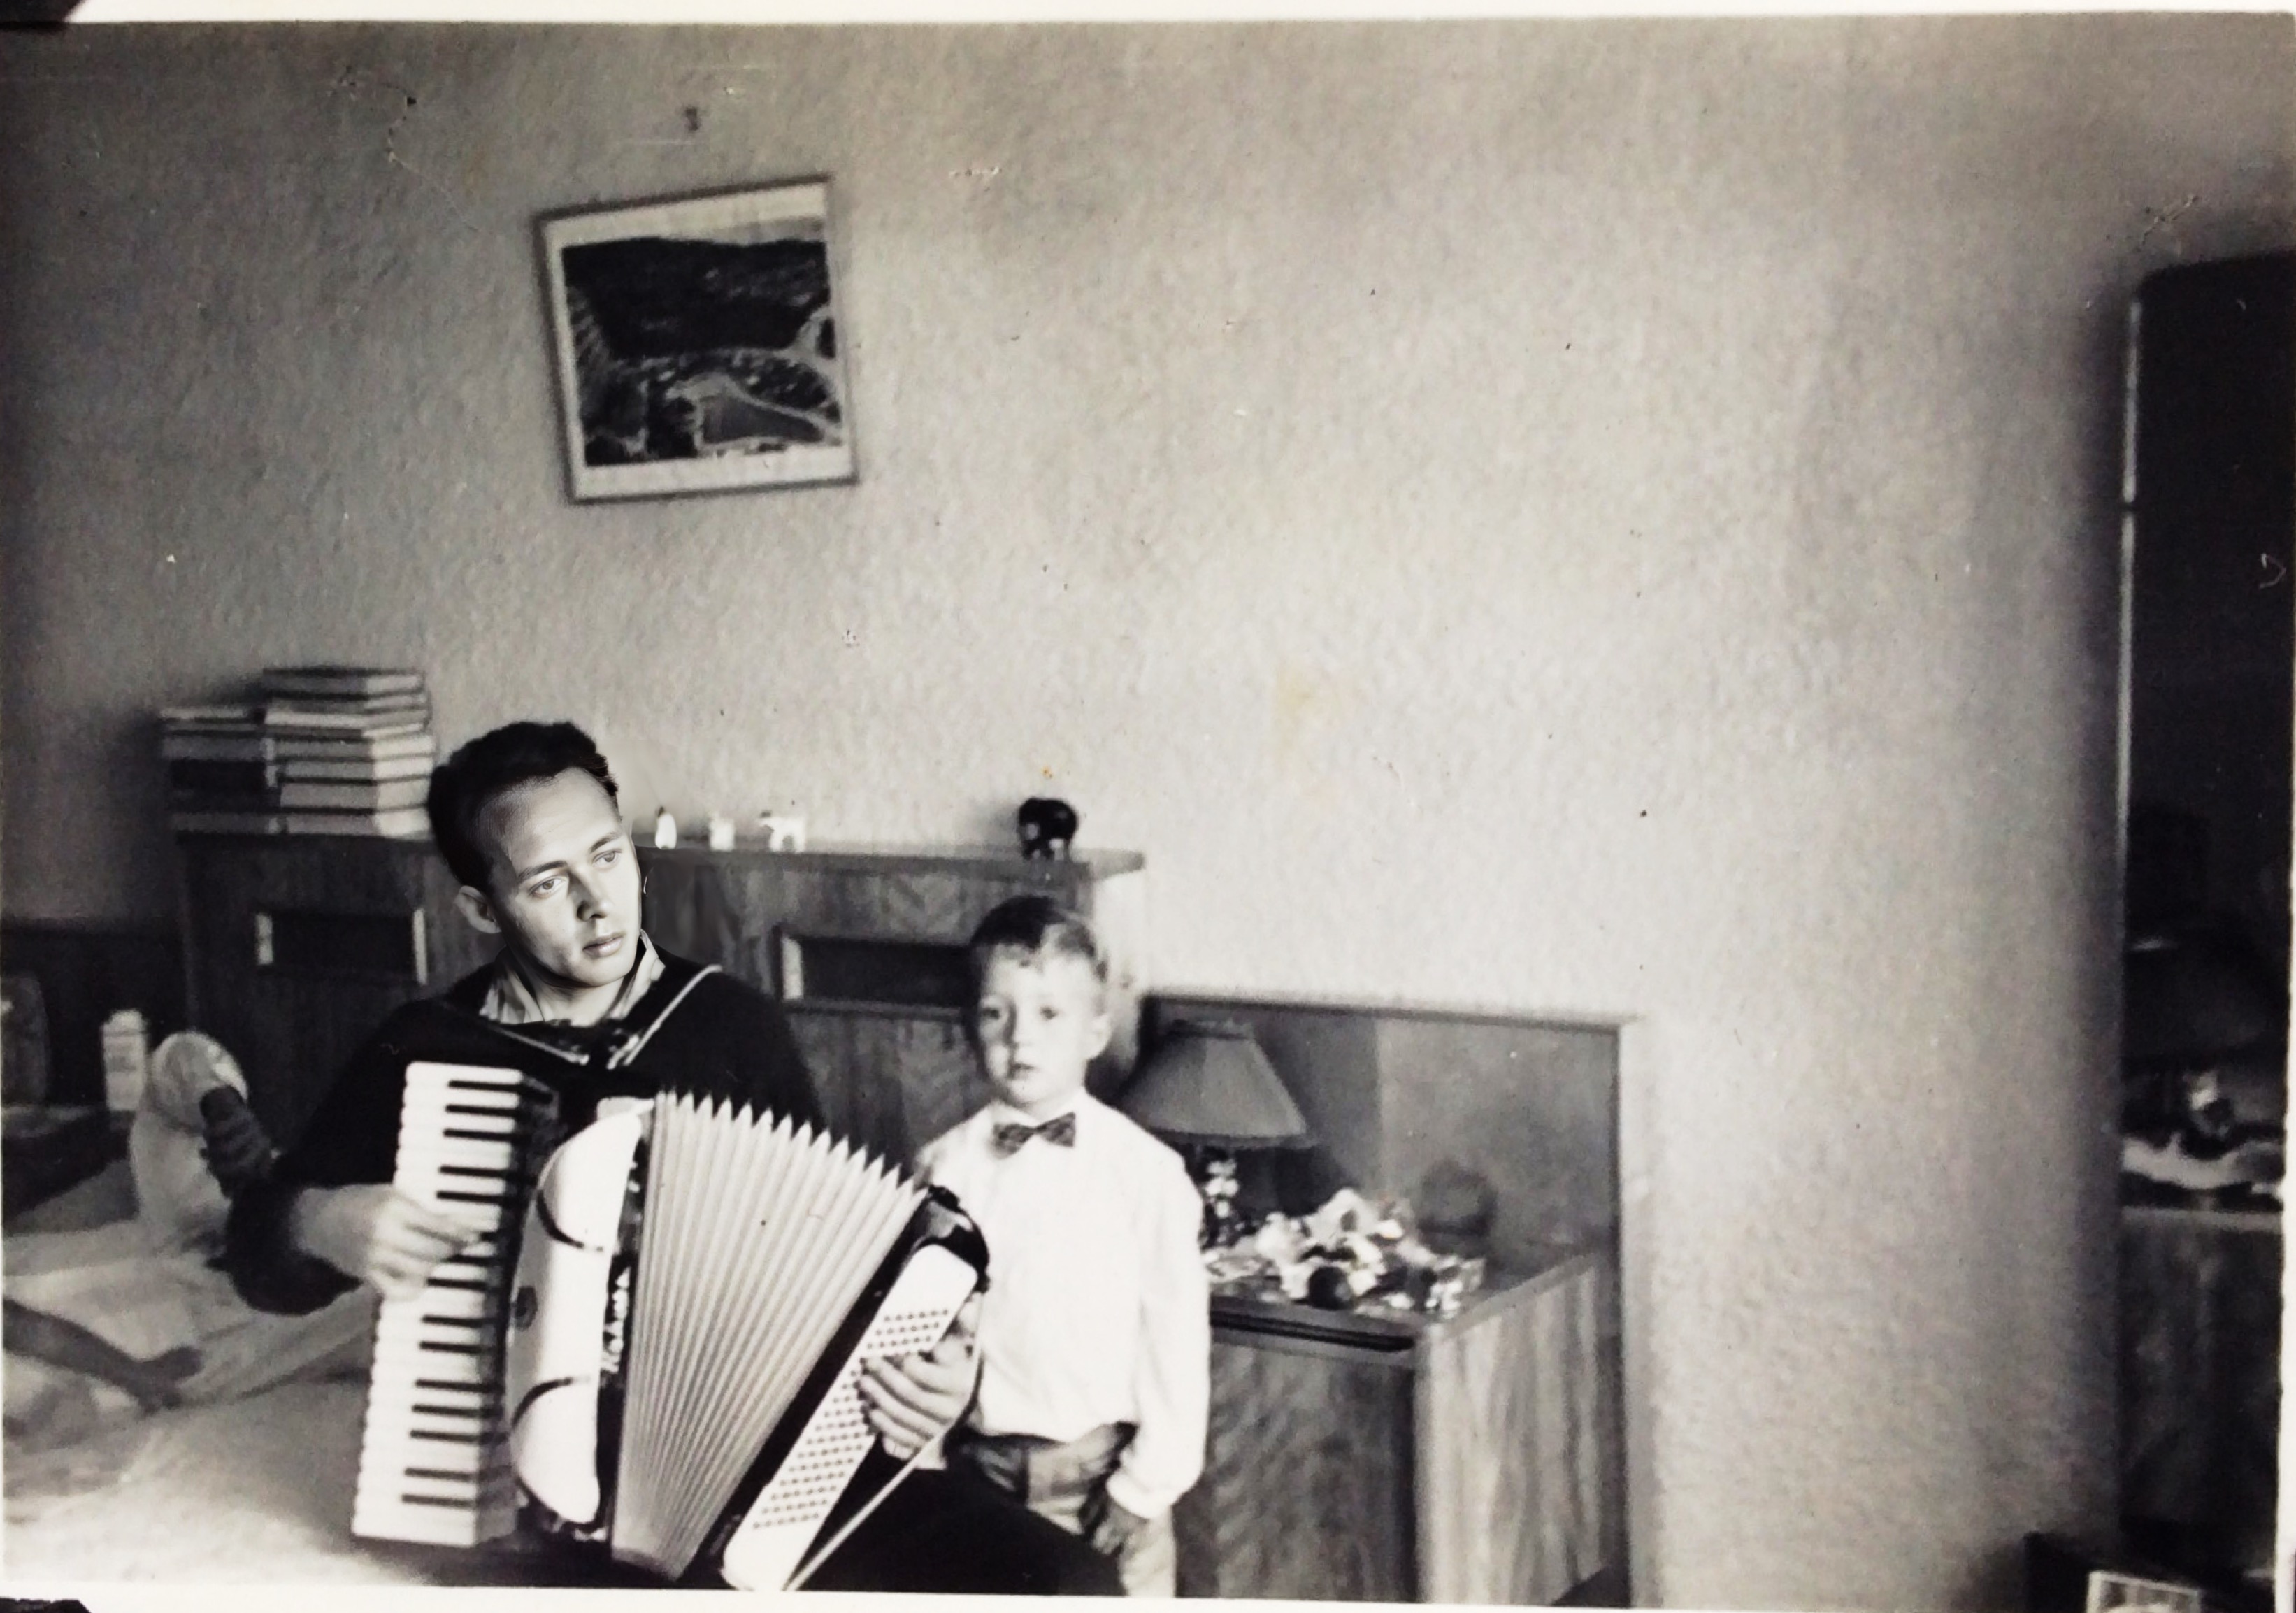 VREDEHOEK FLAT...THE SMALLEST FLAT WE EVER HAD, ONLY 2 ROOMS....HANS PLAYING MY HOHNER ACCORDION....